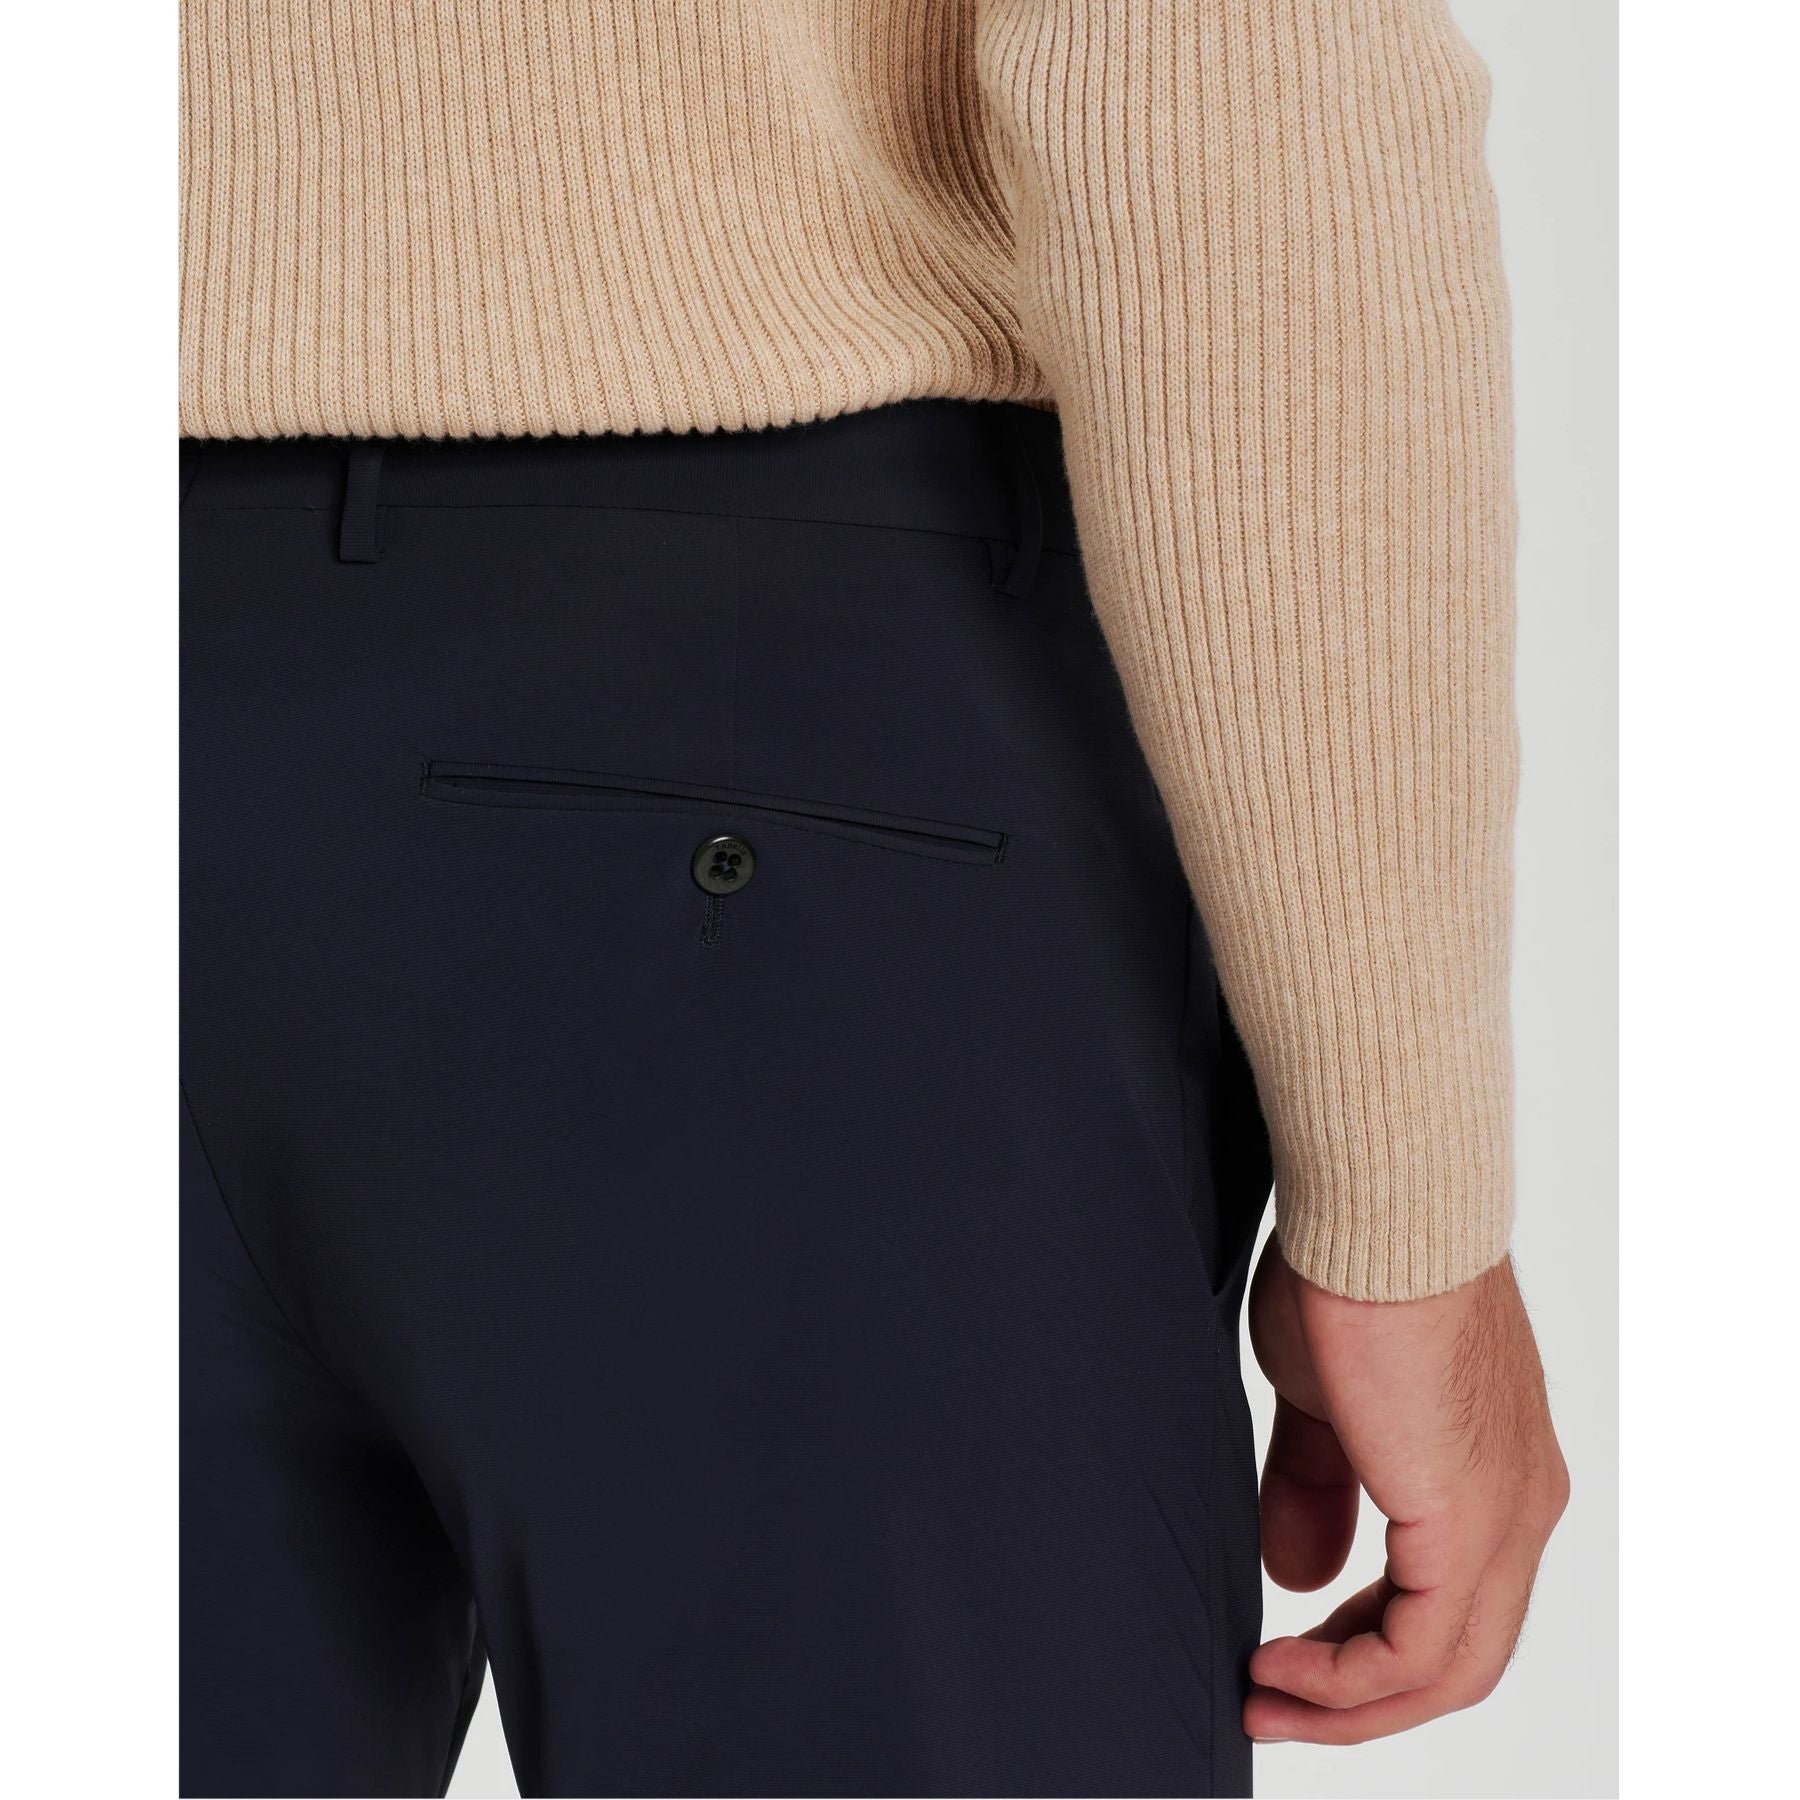 Noah Active Trousers in Navy (Trim Tapered Fit) by Zanella